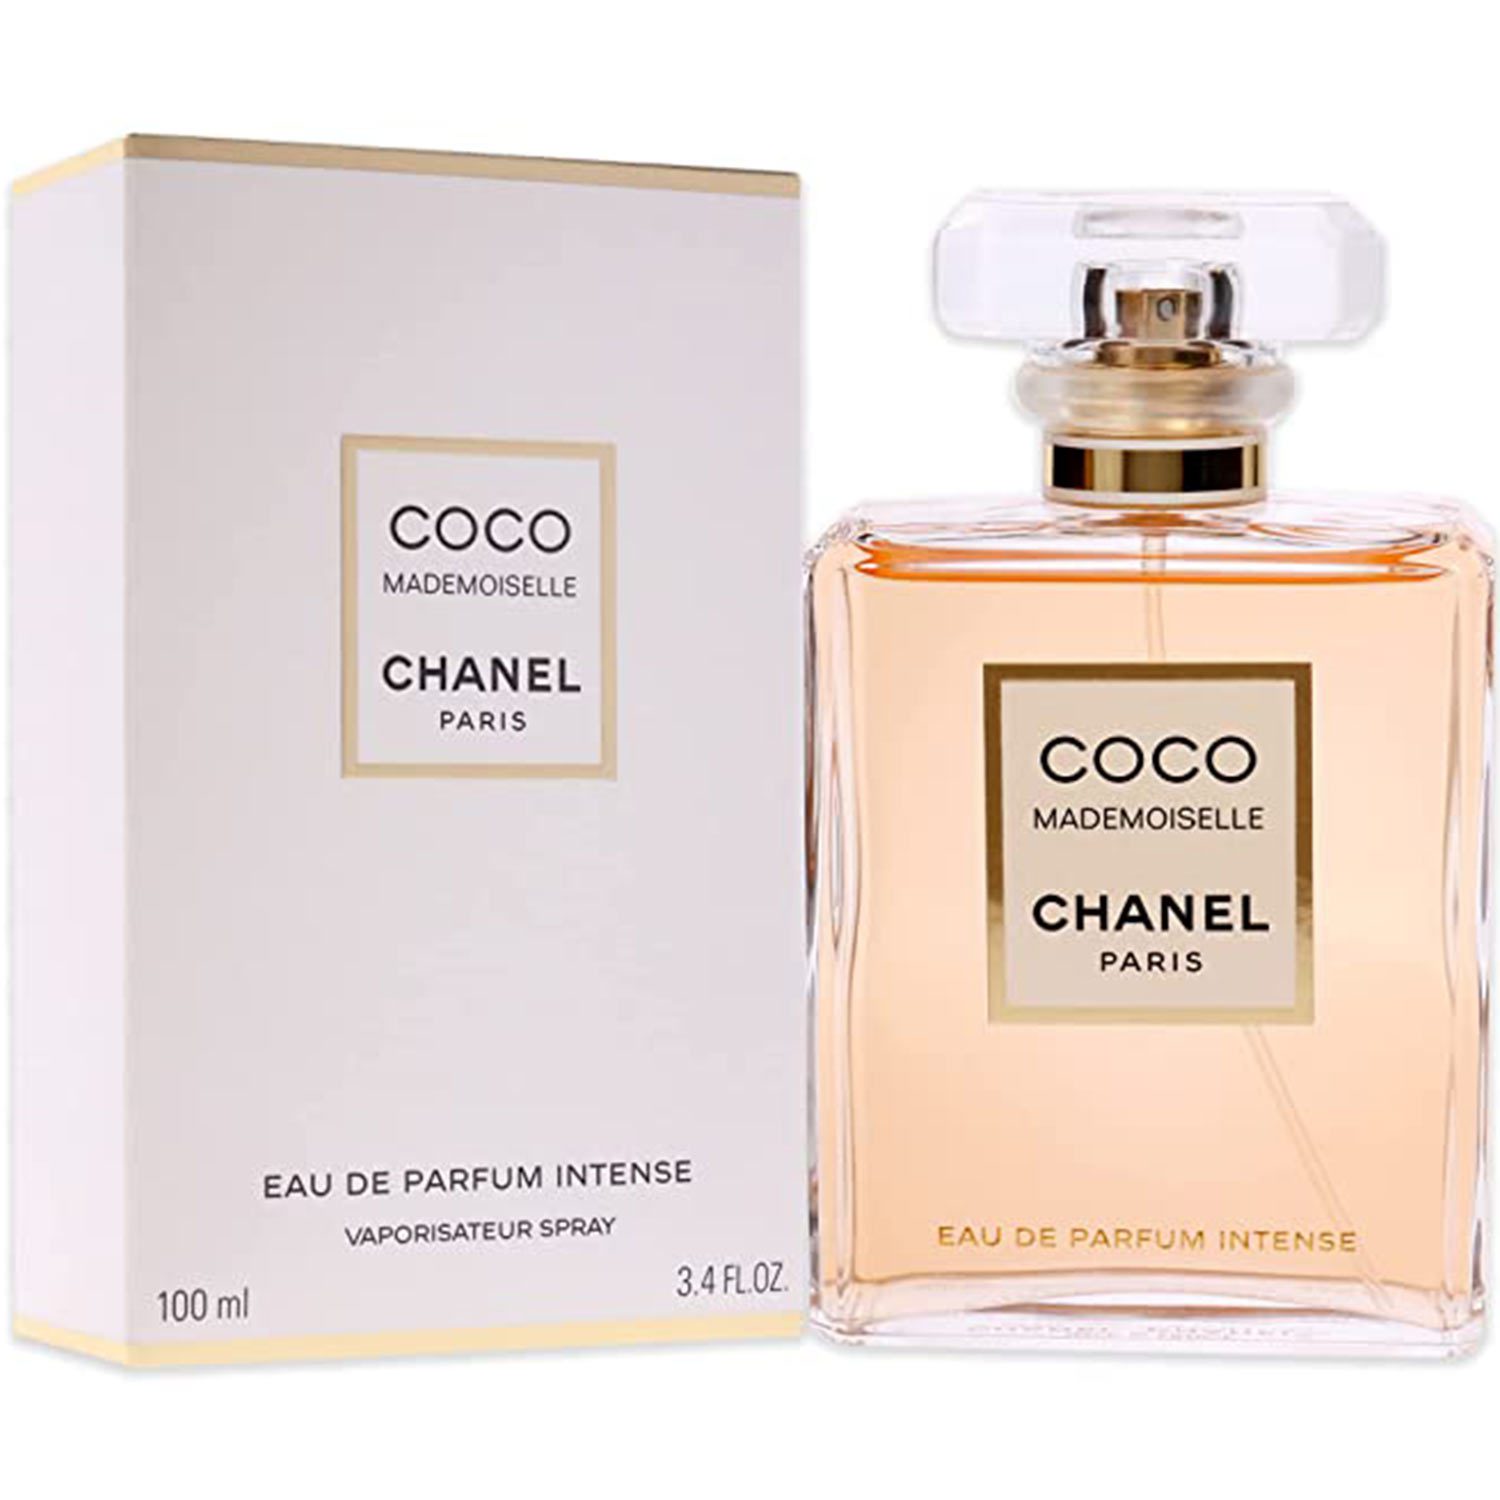 chanel mademoiselle coco